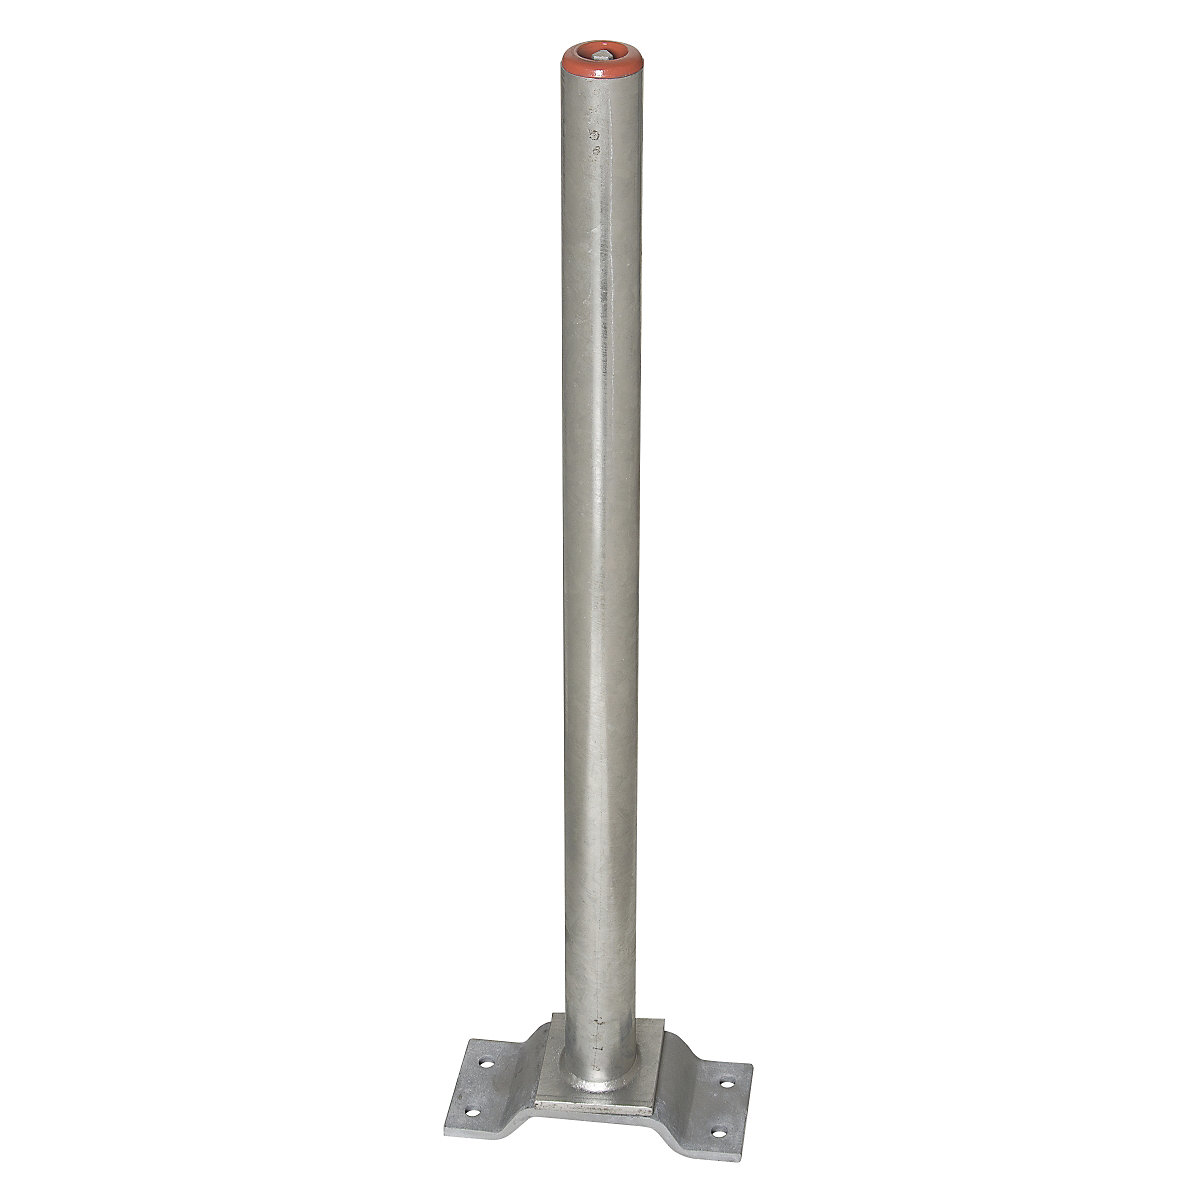 Barrier post made of steel, for bolting in place, Ø 60 mm, hot dip galvanised, 1 chain eyelet-9